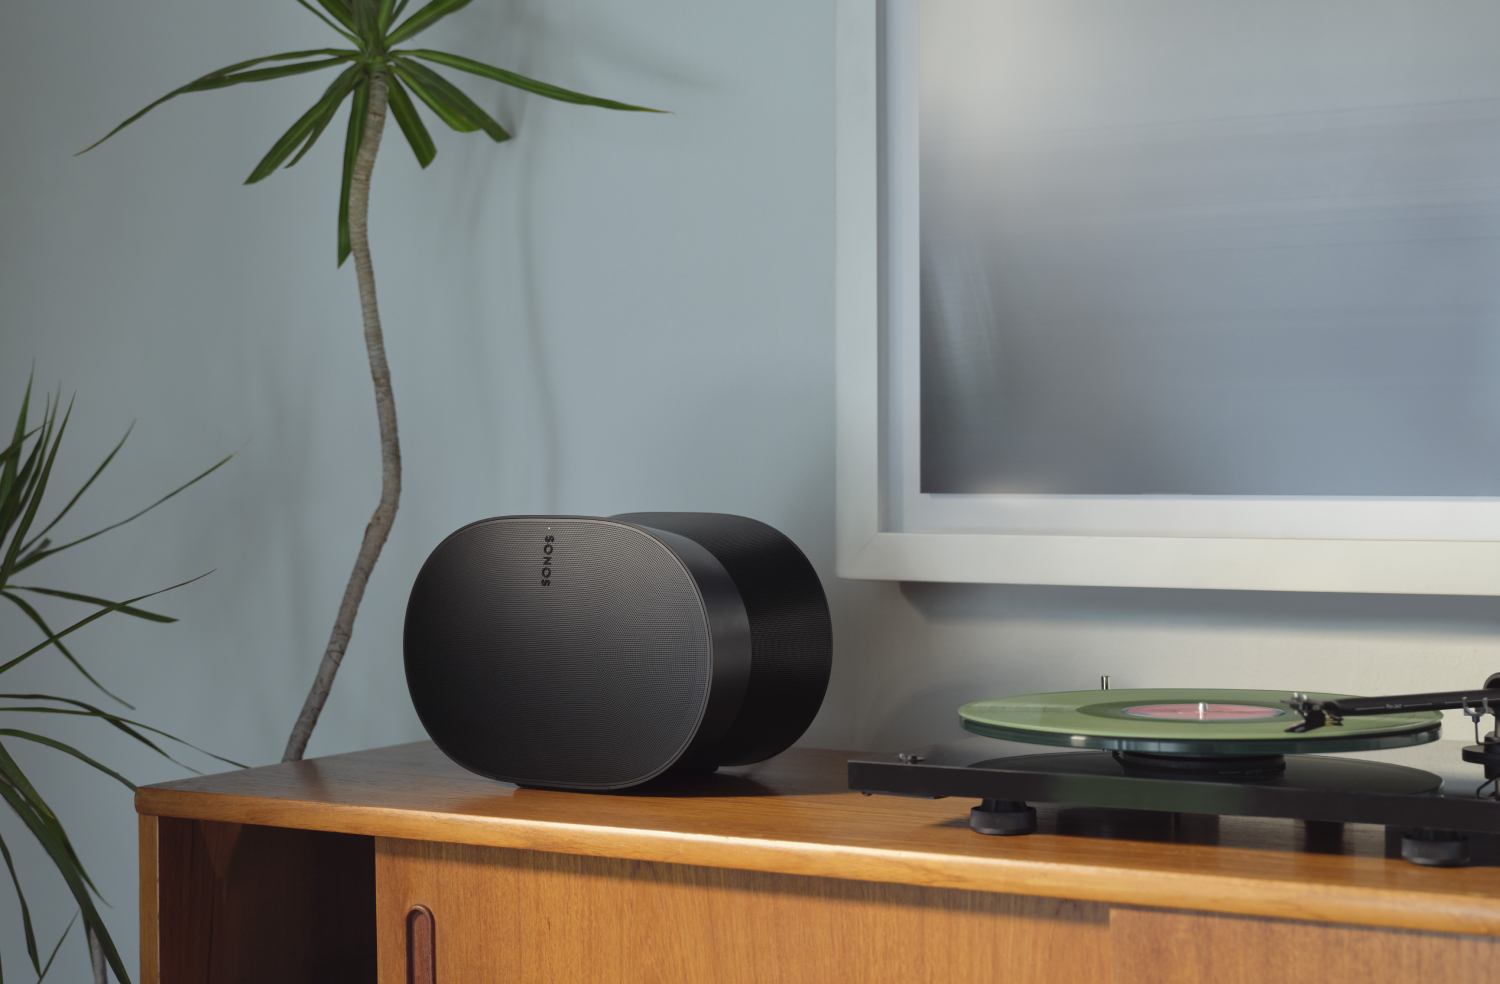 Sonos Era 300 speaker in black connected to a turntable on a sideboard. A plant can be seen in the corner with a window behind.